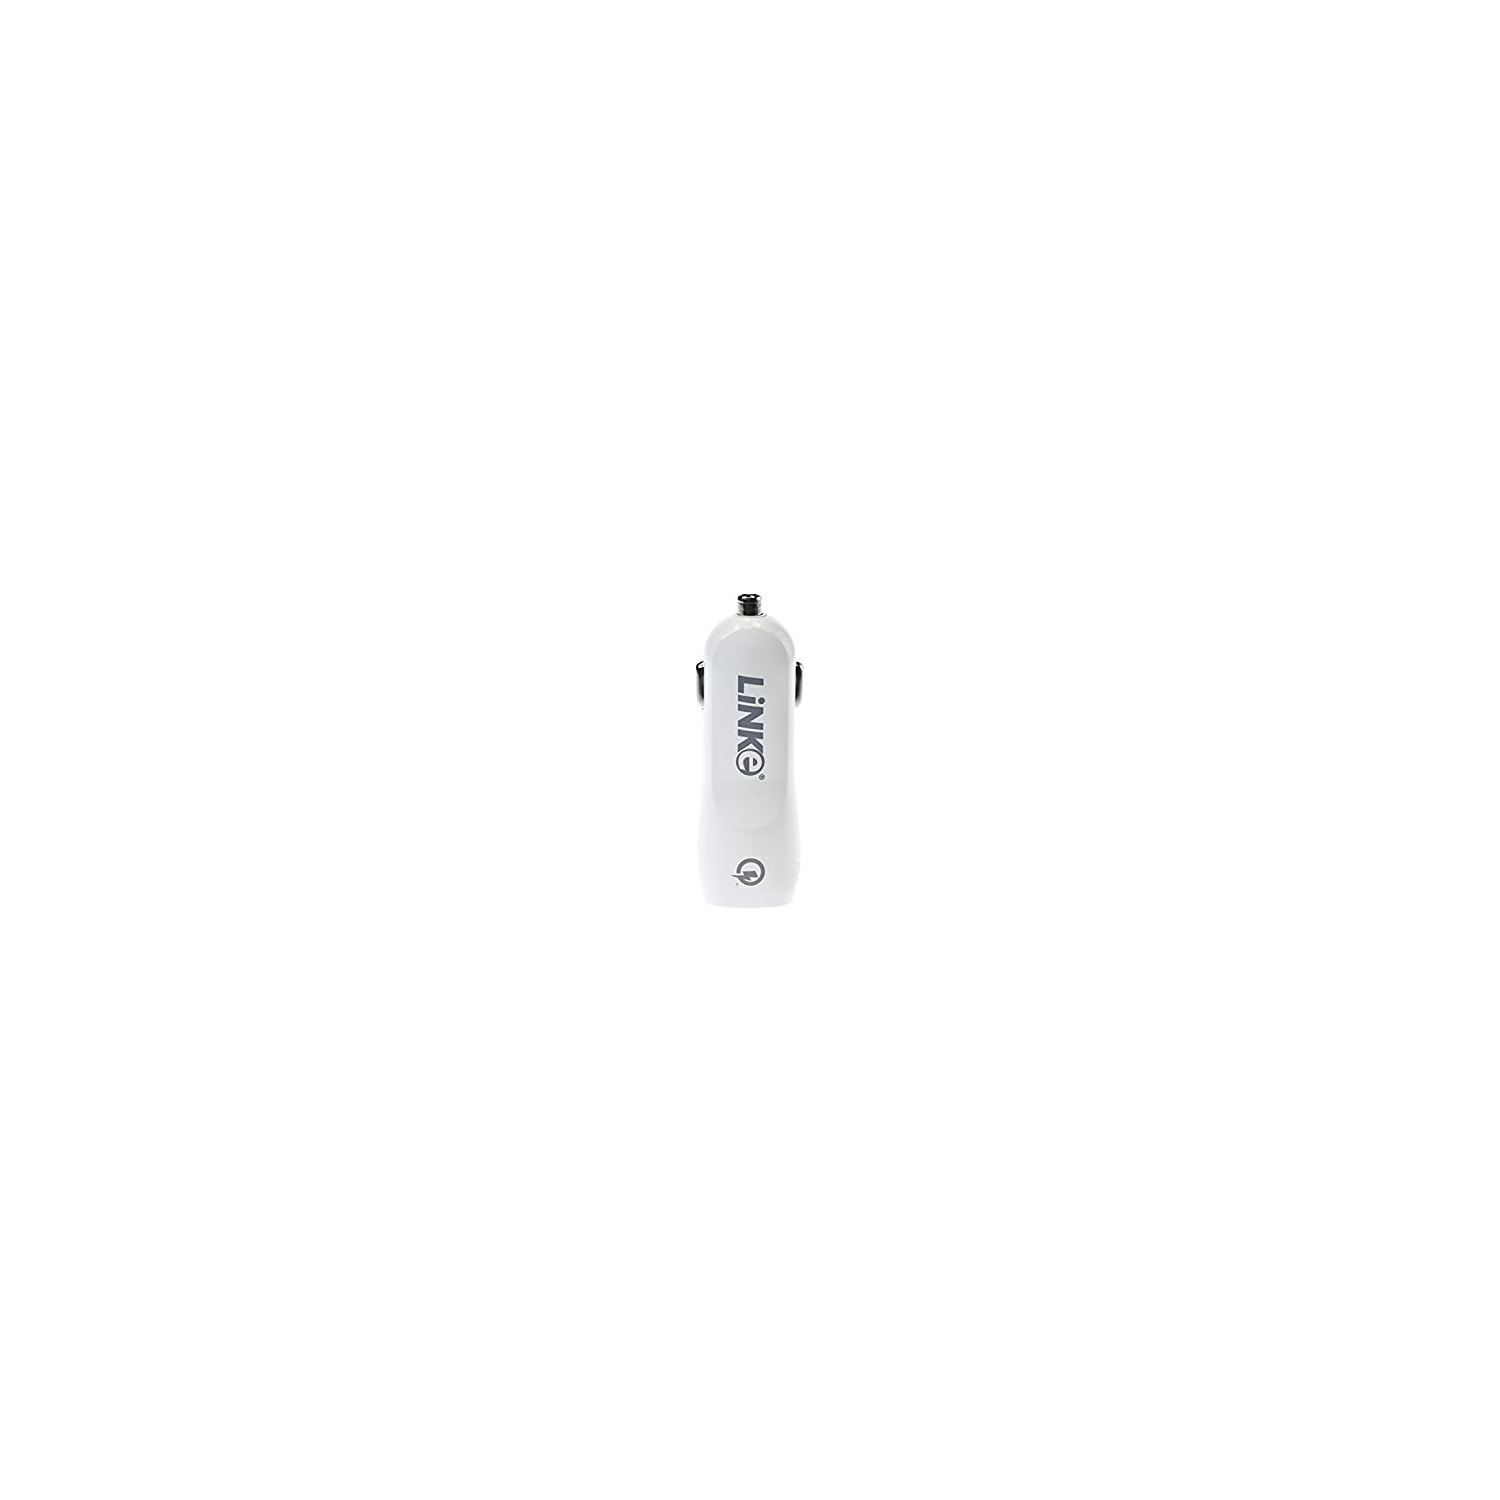 Linke Qualcomm Certified Quick Charge 2.0 USB Car Charger for iPhone / Mobile Phones - White